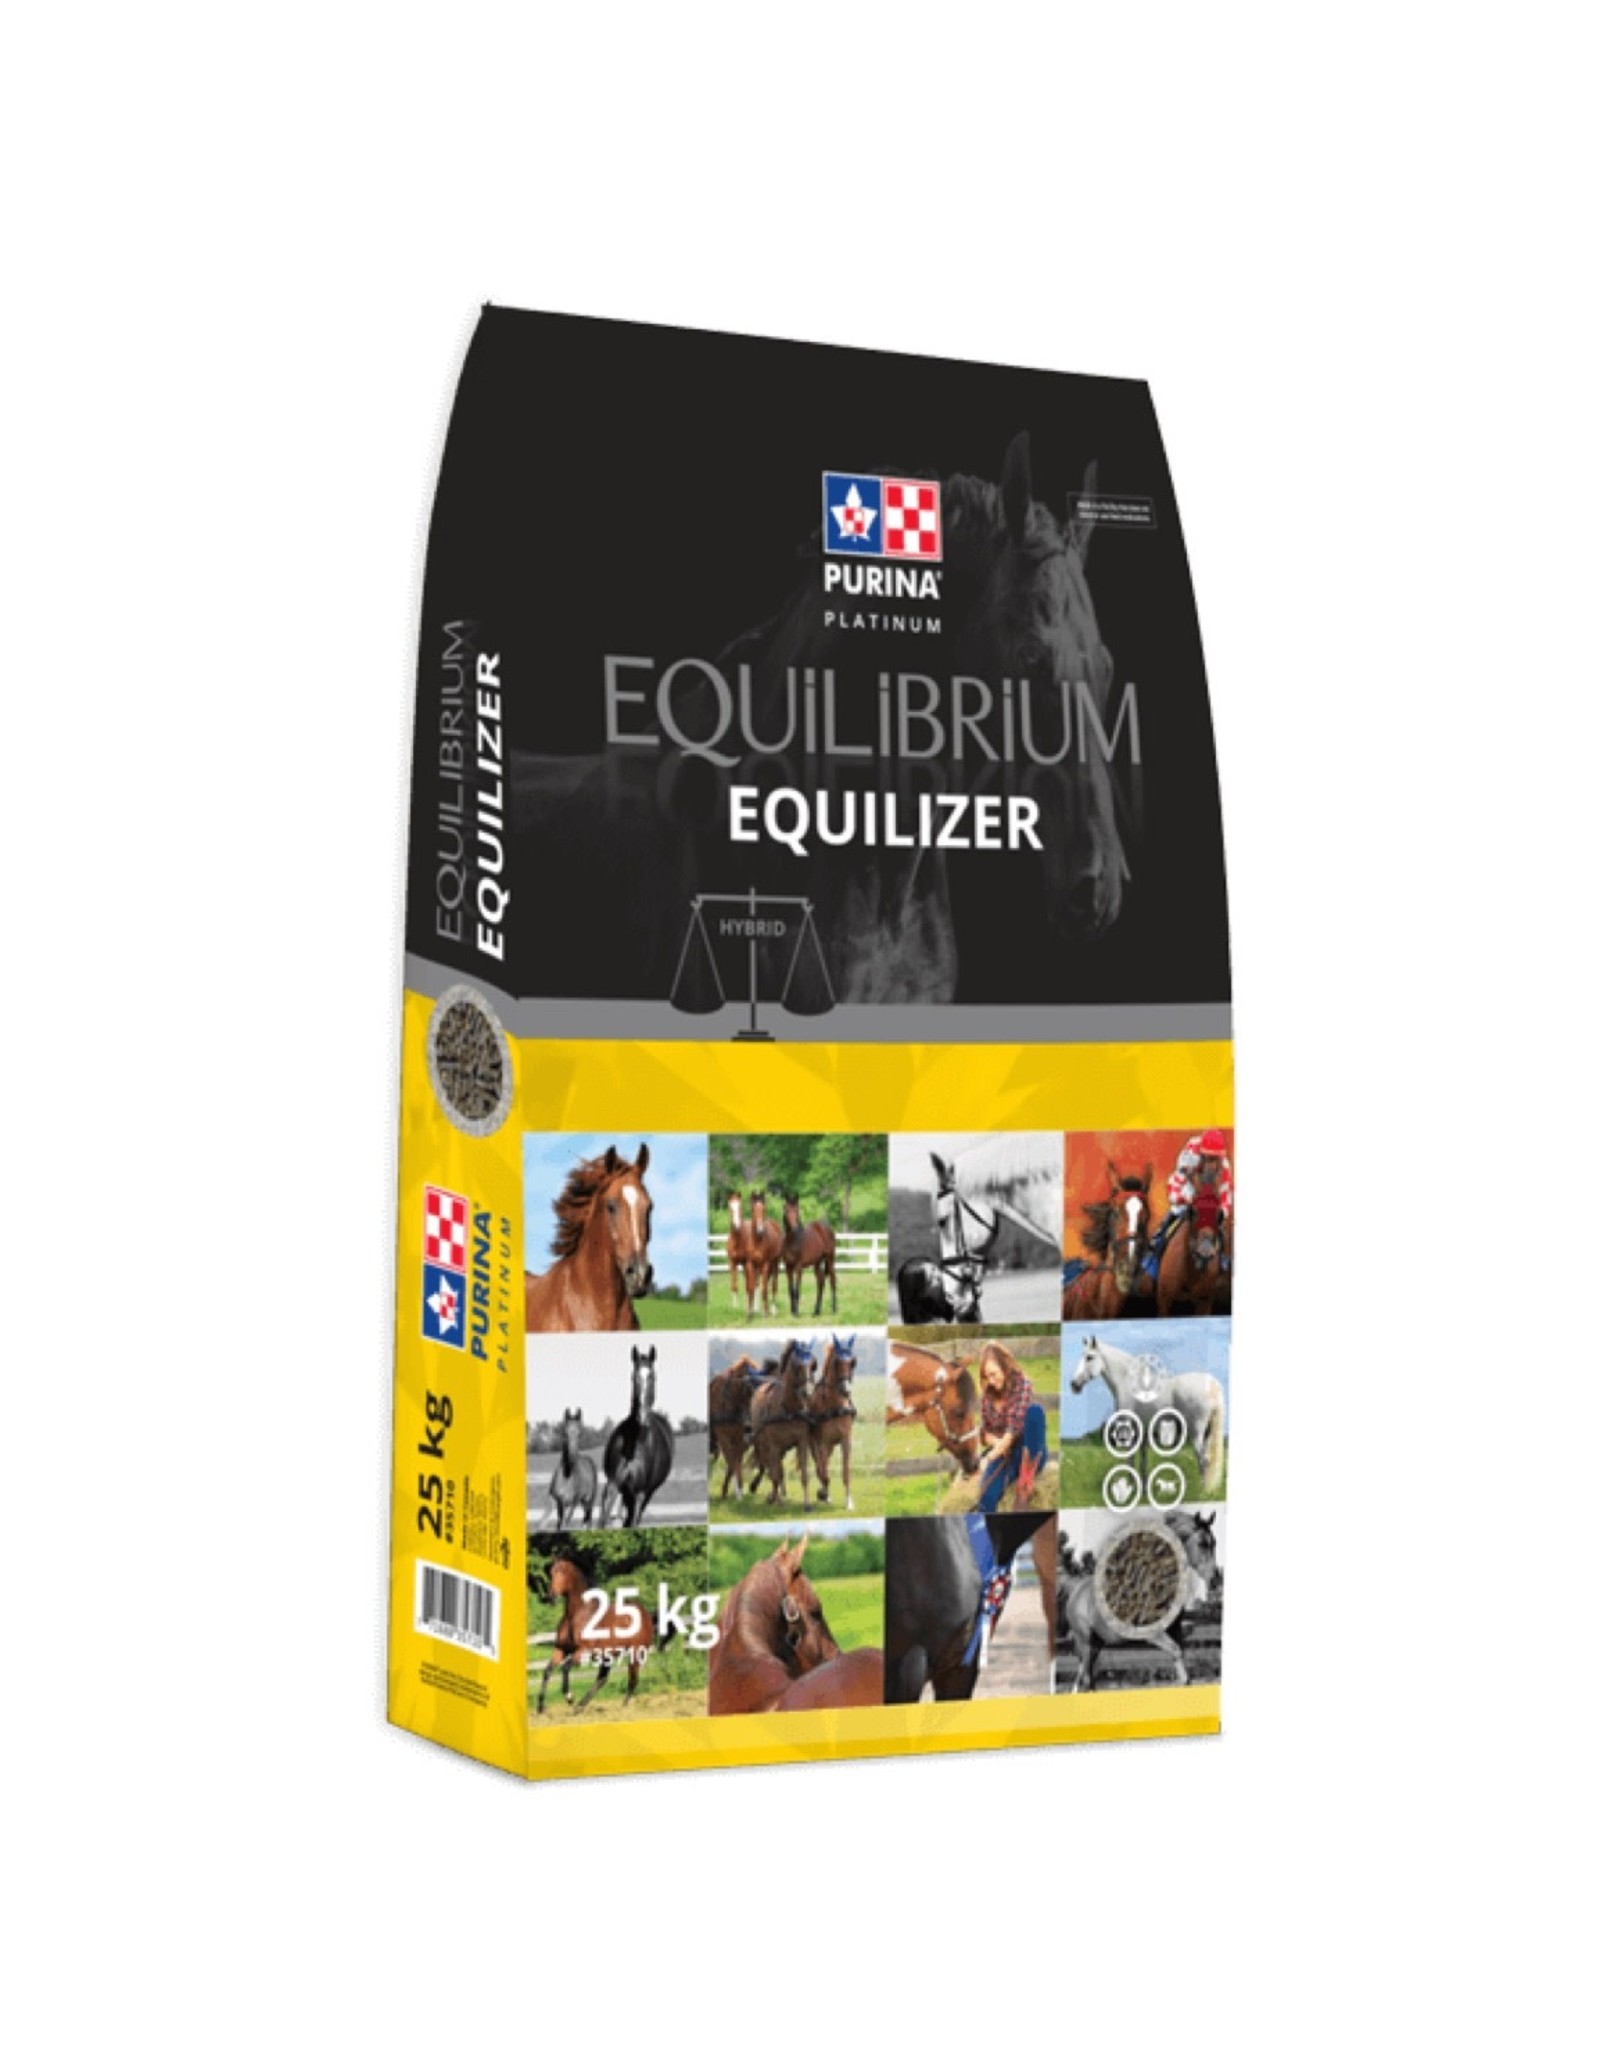 Purina PURINA EQUILIBRIUM EQUILIZER 25 Kg - CP35710  -  Supplement/Ration Balancer - NCS 10%  - CP 12%, Fat 4%, Fiber 15% - Equilizer is formulated for inactive adult and performance horses, including pony and miniature horses. Suitable for a low NSC diet.